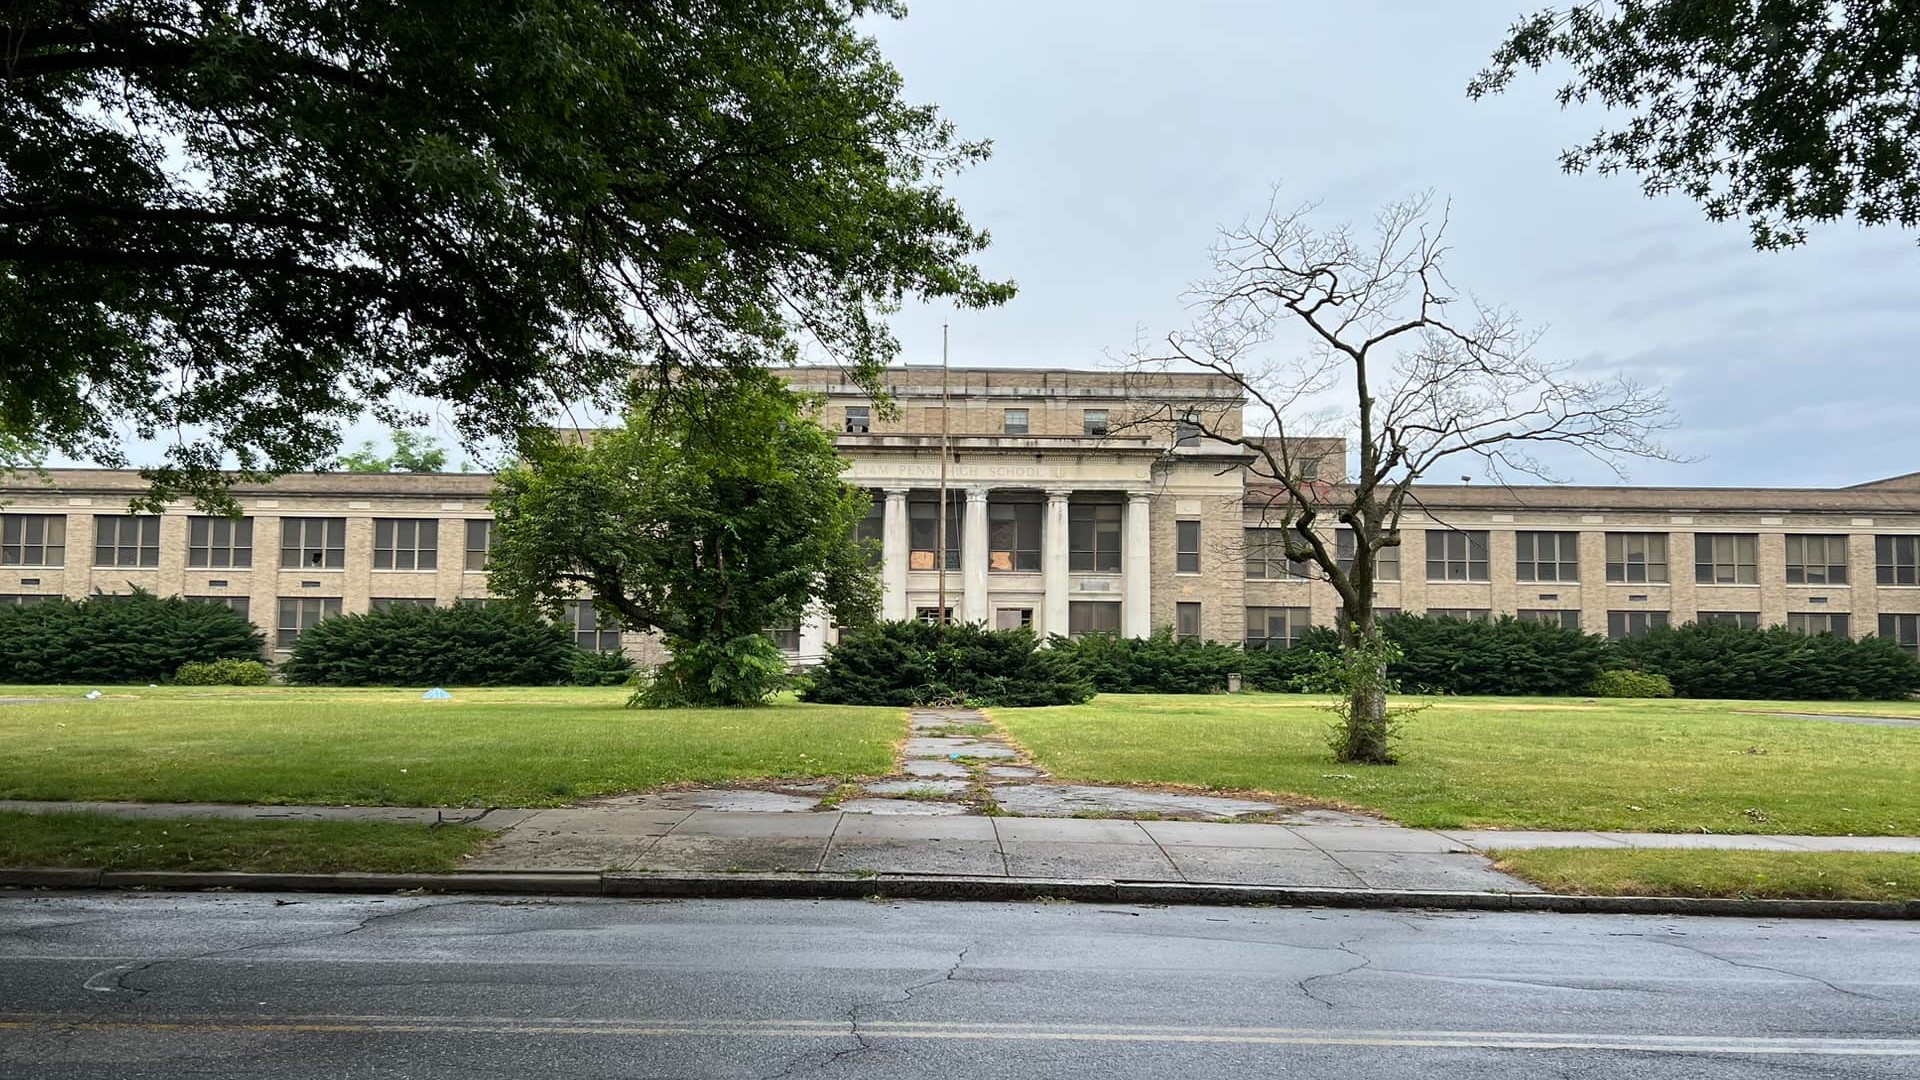 The Harrisburg School District will hold a “last chance” meeting tonight to determine the fate of the abandoned William Penn High School.